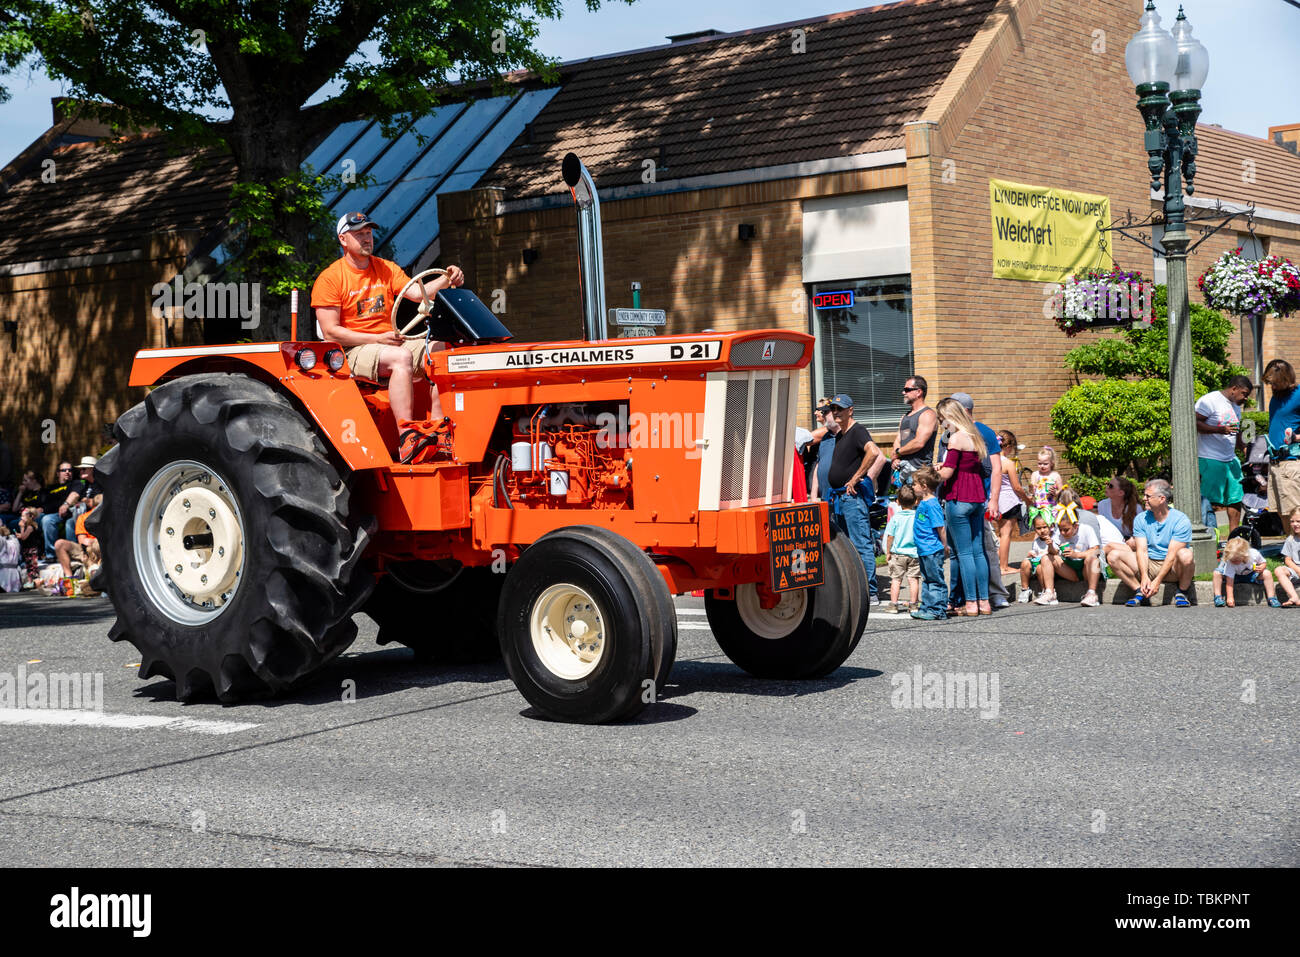 Allis-Chalmers D 21 tractor in the 2019 Lynden Farmers Day Parade.  Lynden, Washington Stock Photo